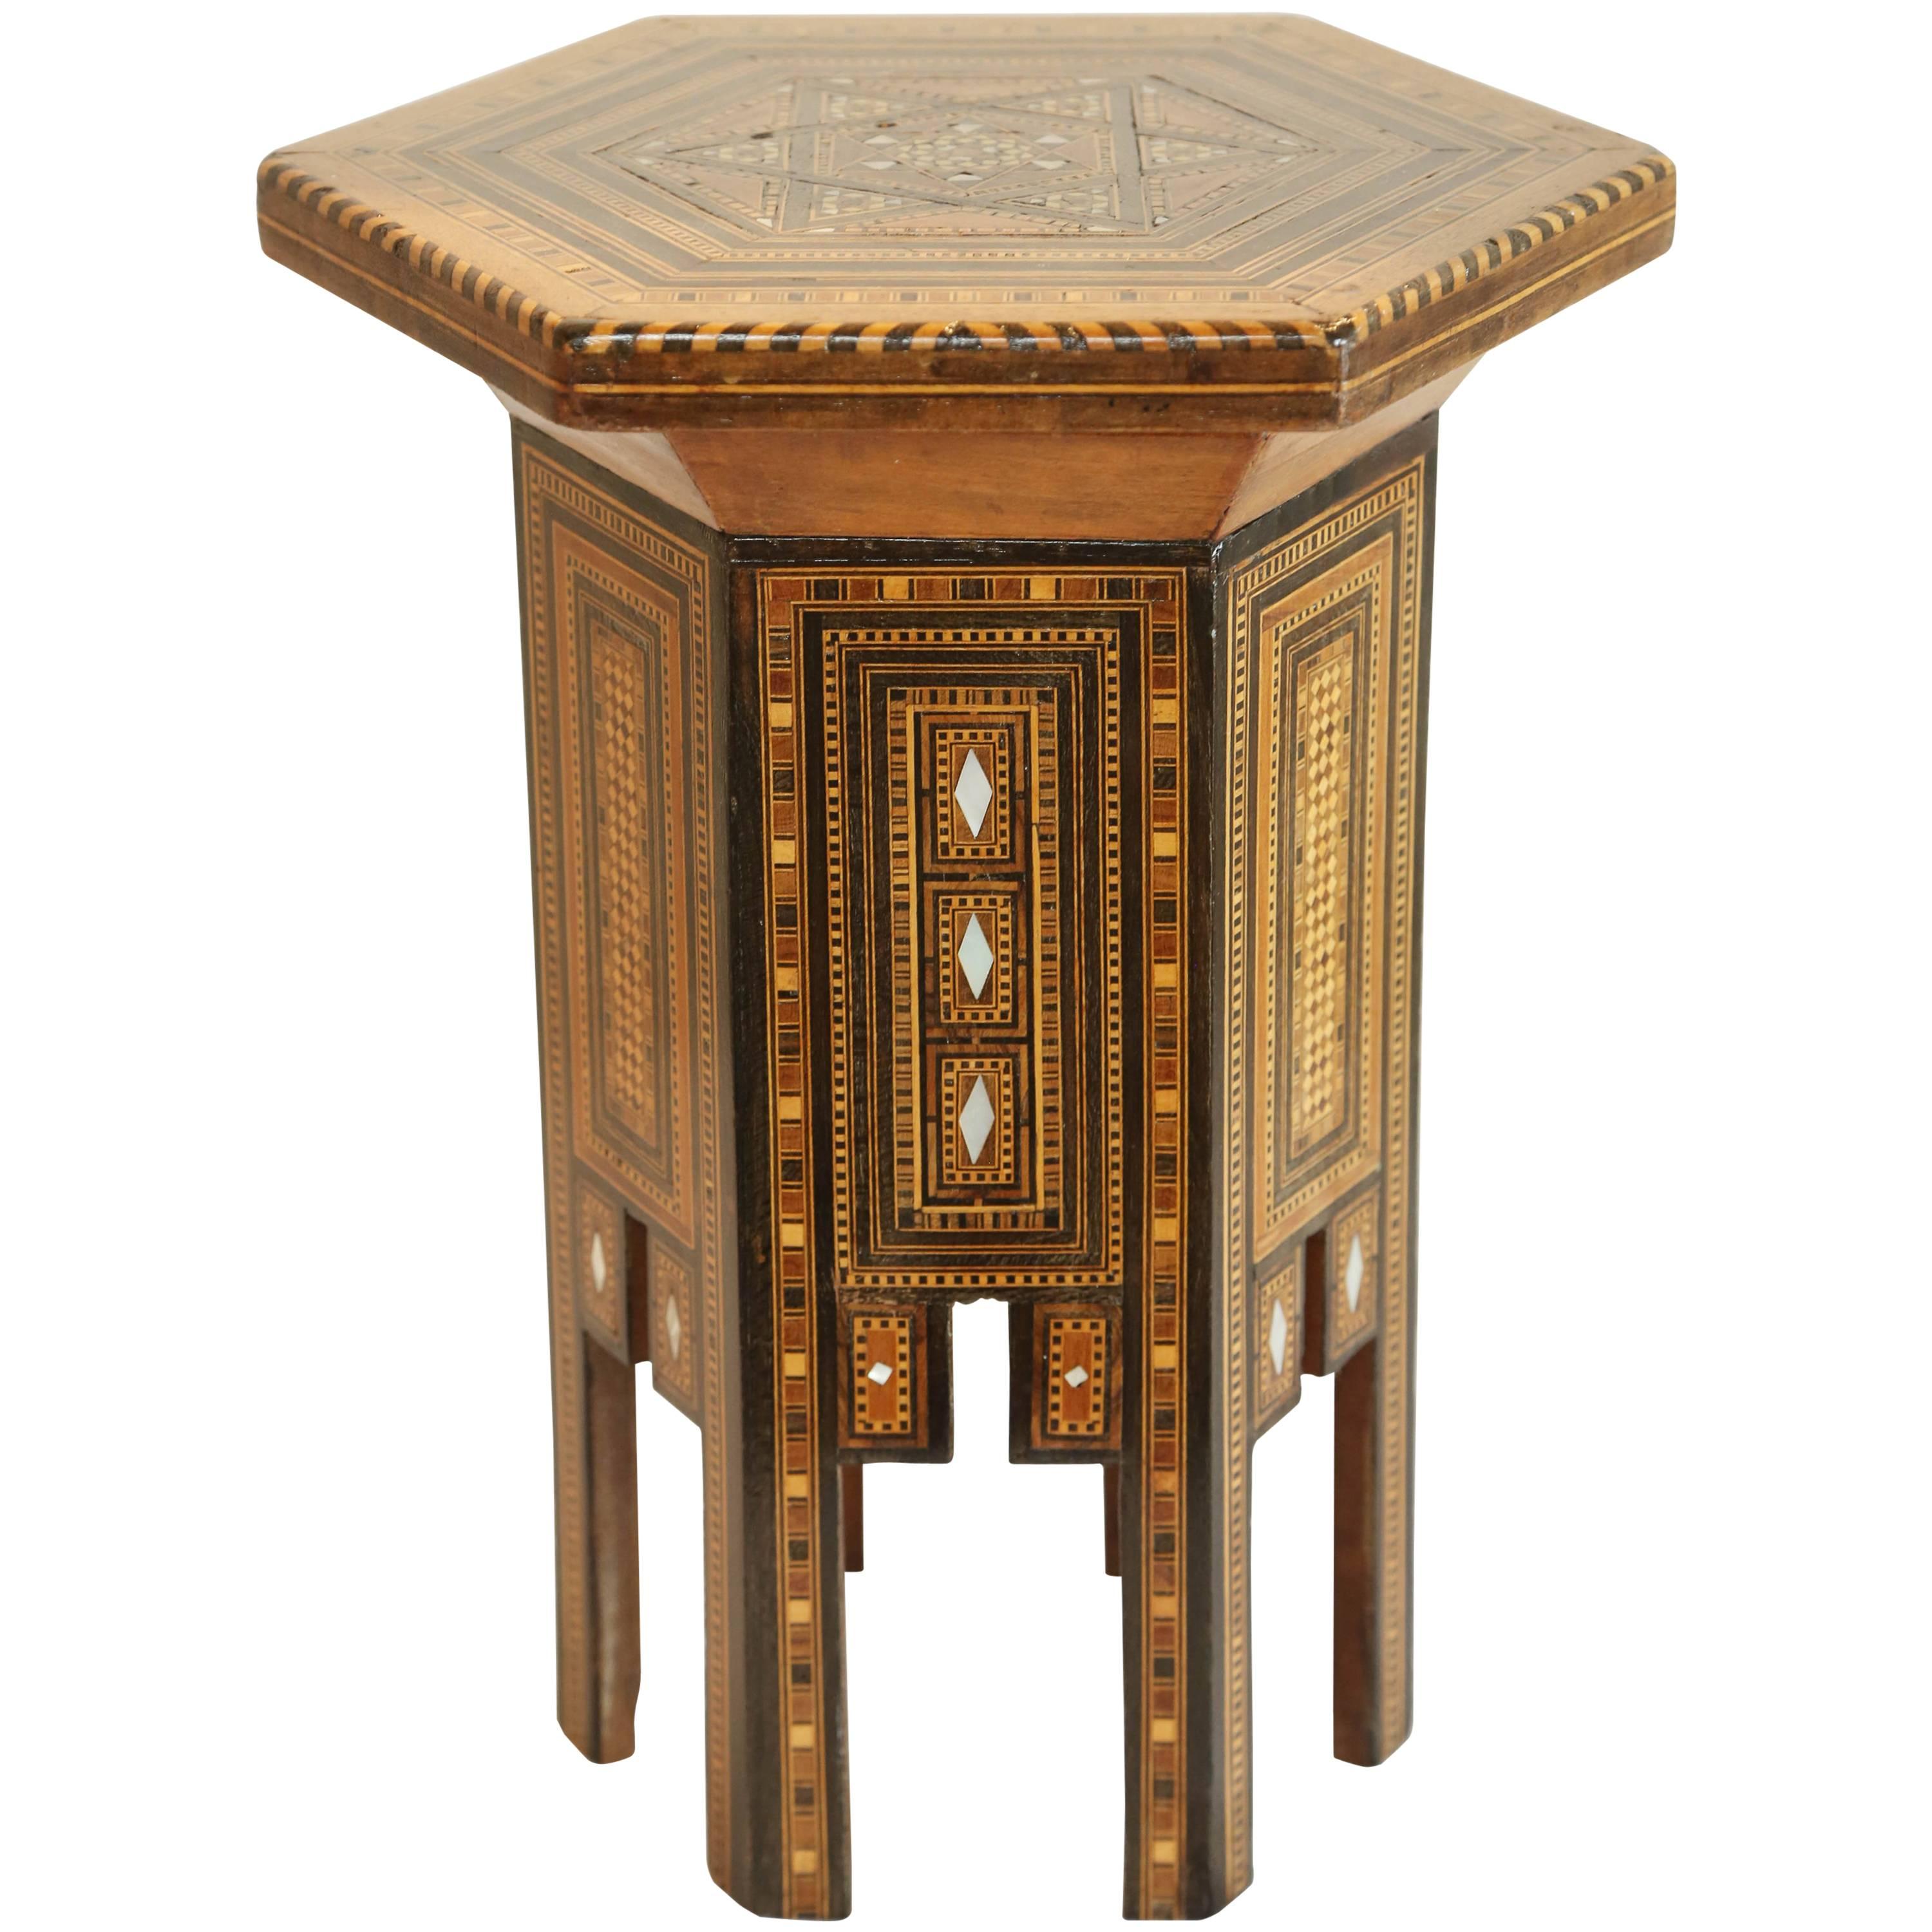 Six Sided Inlaid Syrian Stand